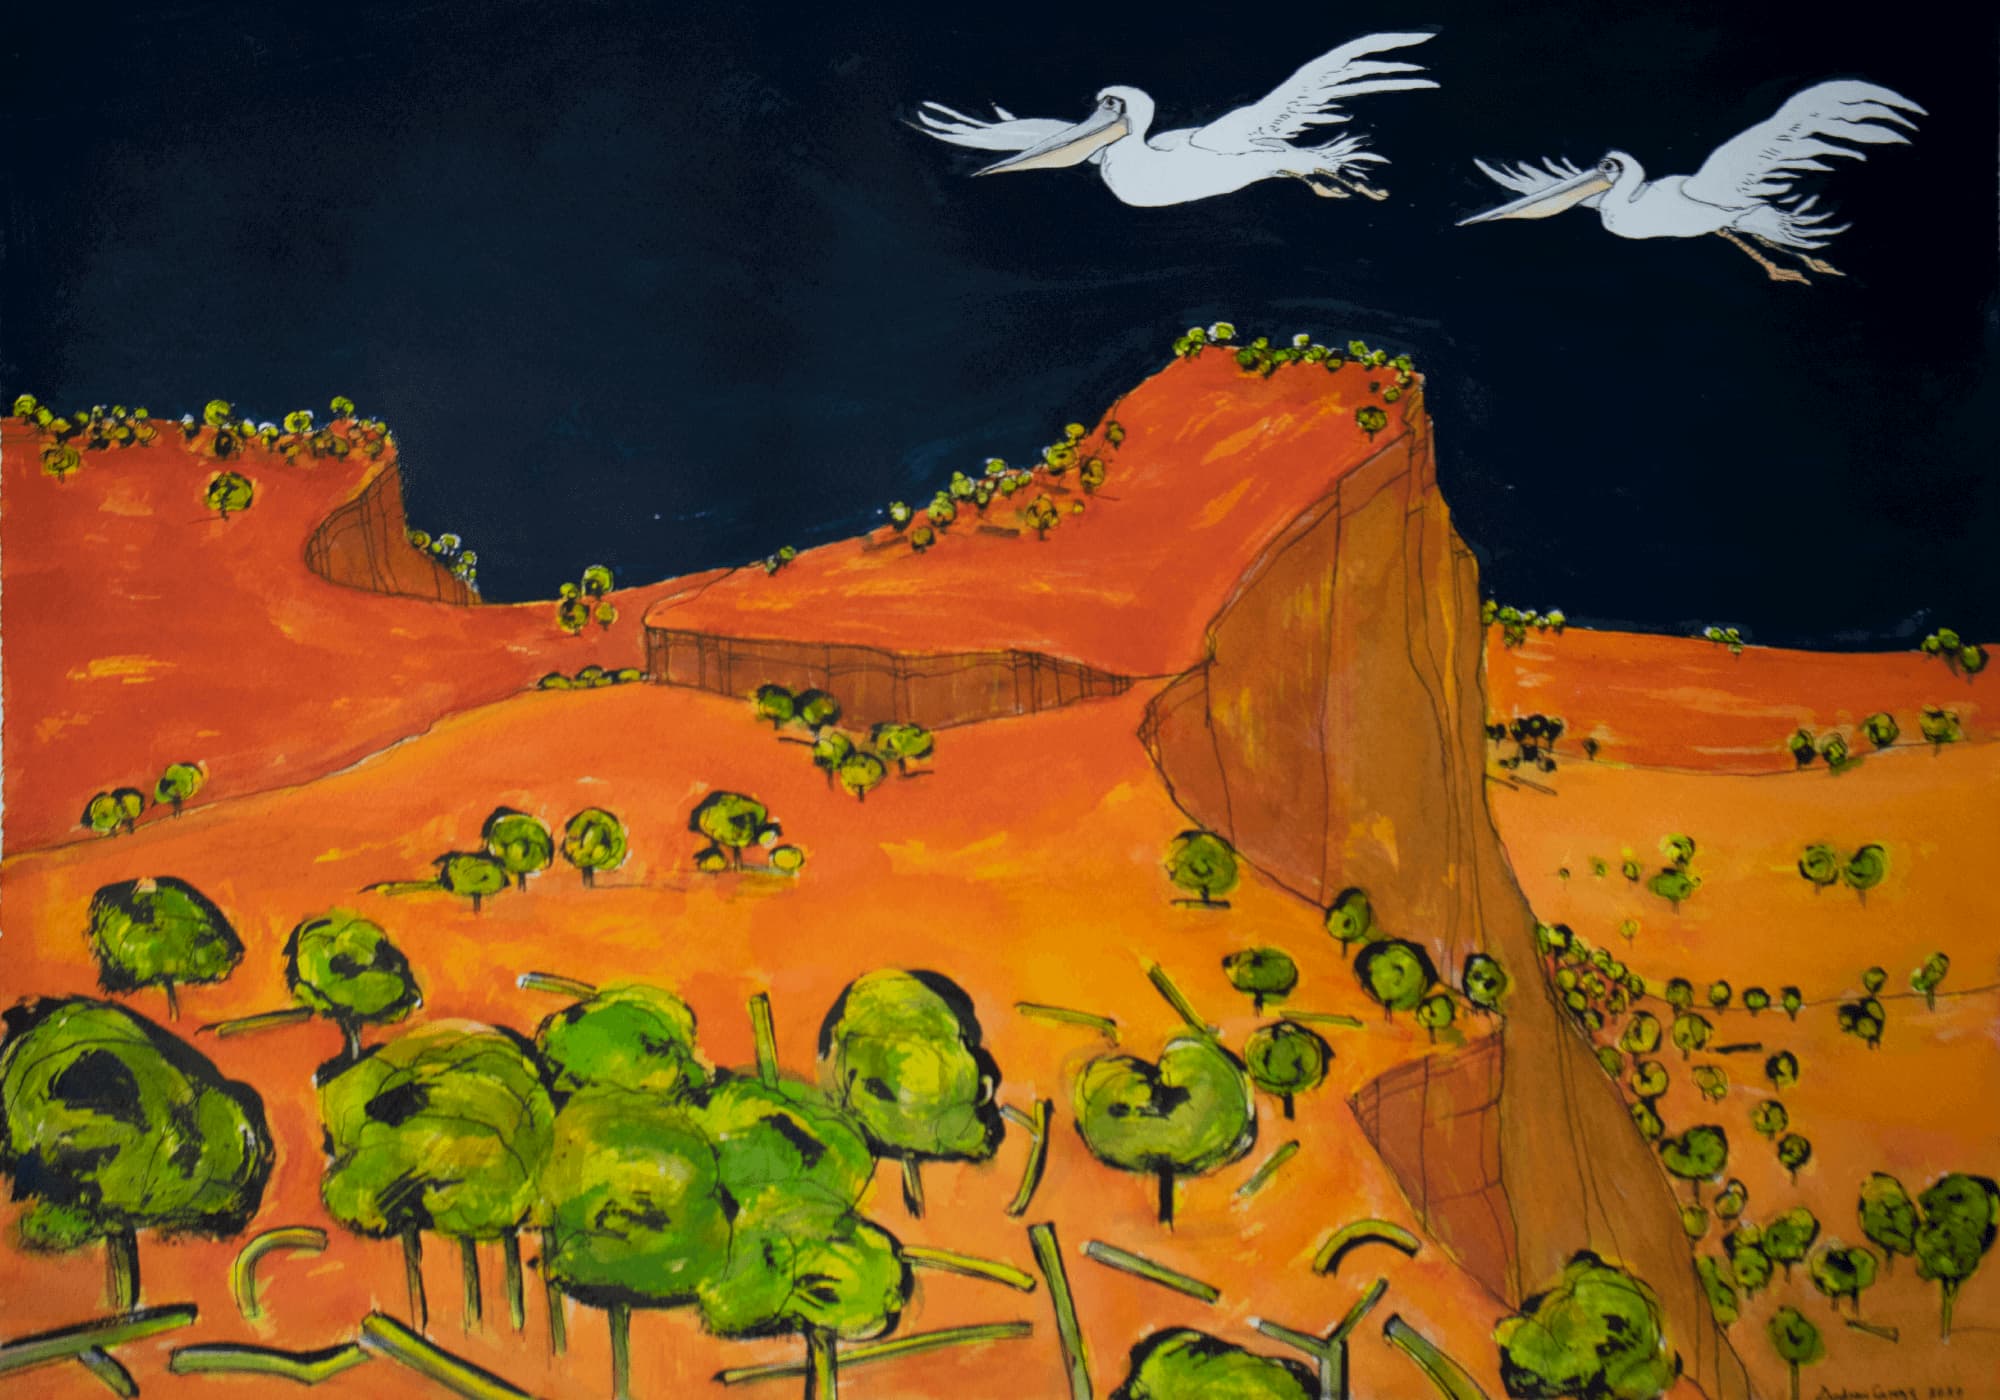 bright, colourful painting of two pelicans flying across a black sky.  The Australian landscape has bright orange cliffs in the background with stylized green trees in the foreground.  Painting by Andrew Gregg